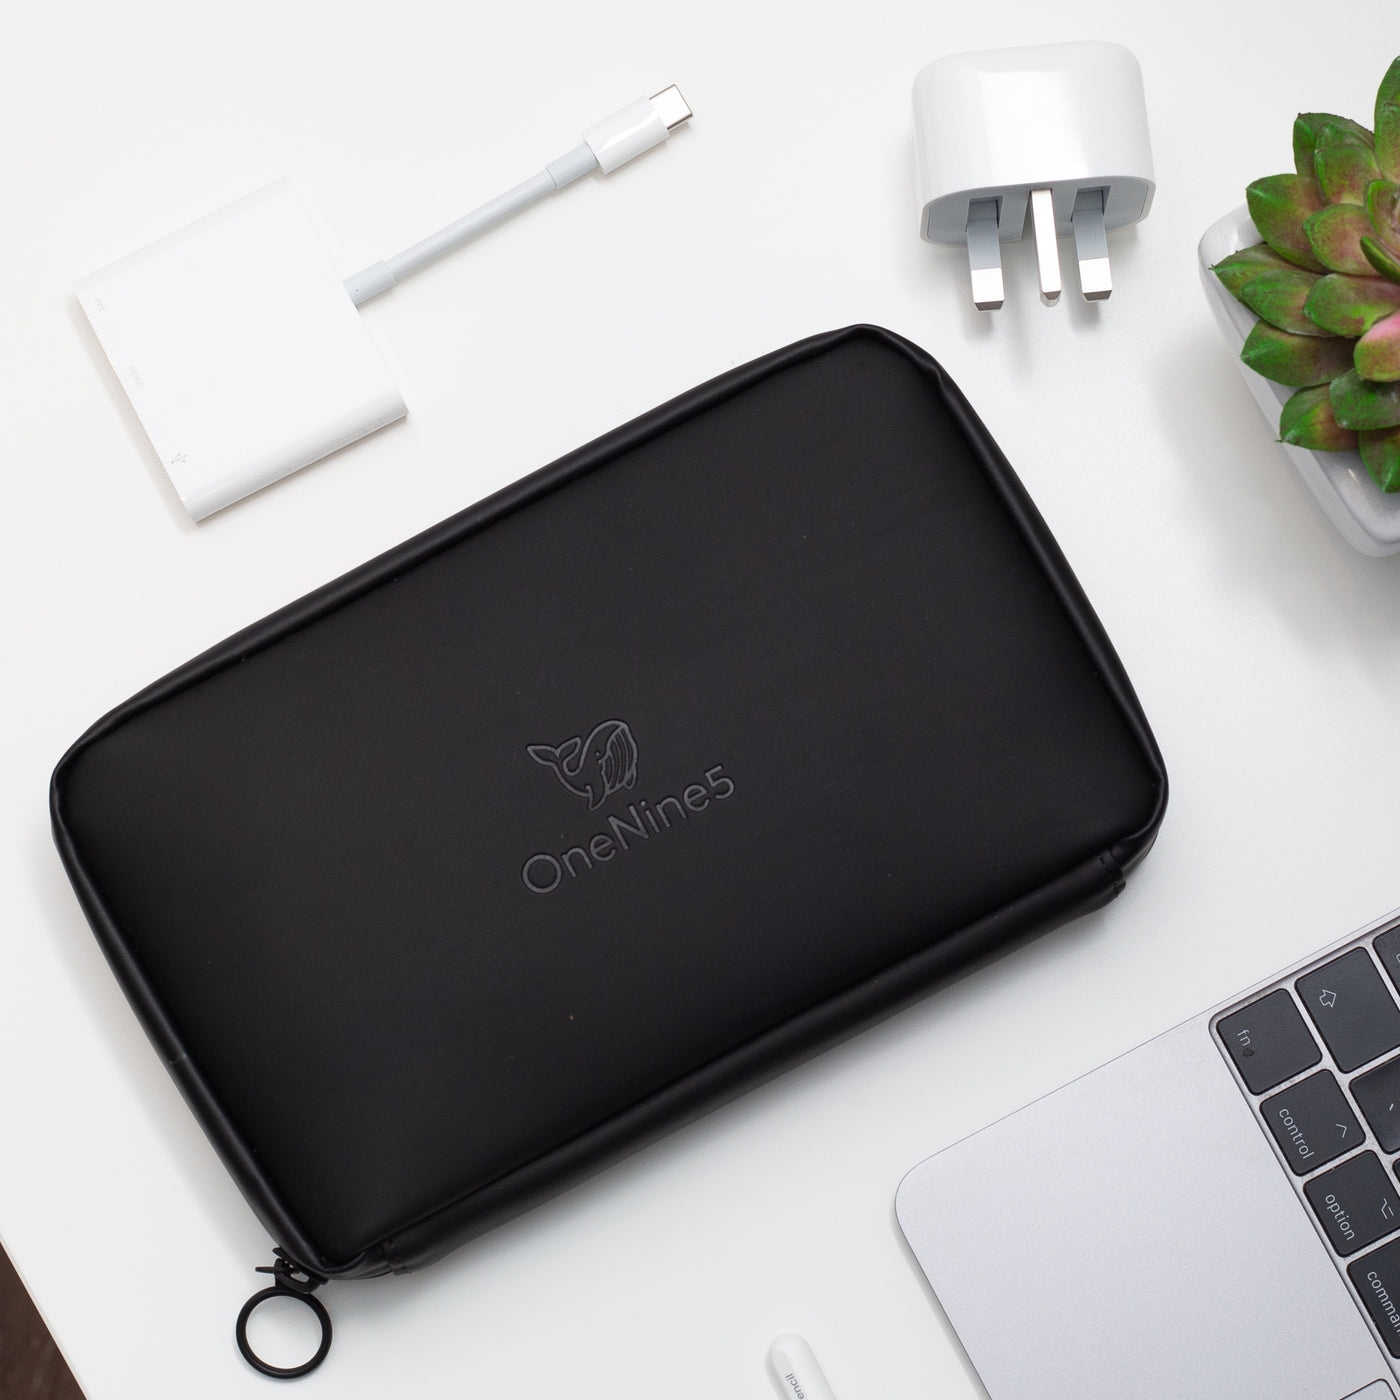 A birdseye oview of the OneNine5 Miho Black Eco Essentials Pouch, laid flat n a white desk. The debossed OneNine5 logo is visible on the front of the pouch. From the bottom right corner an Apple Macbook and Apple Pencil are visible. At the top of the shot is an Apple USB-C Digital AV Multiport Adapter and a small green plant in a white plantpot.